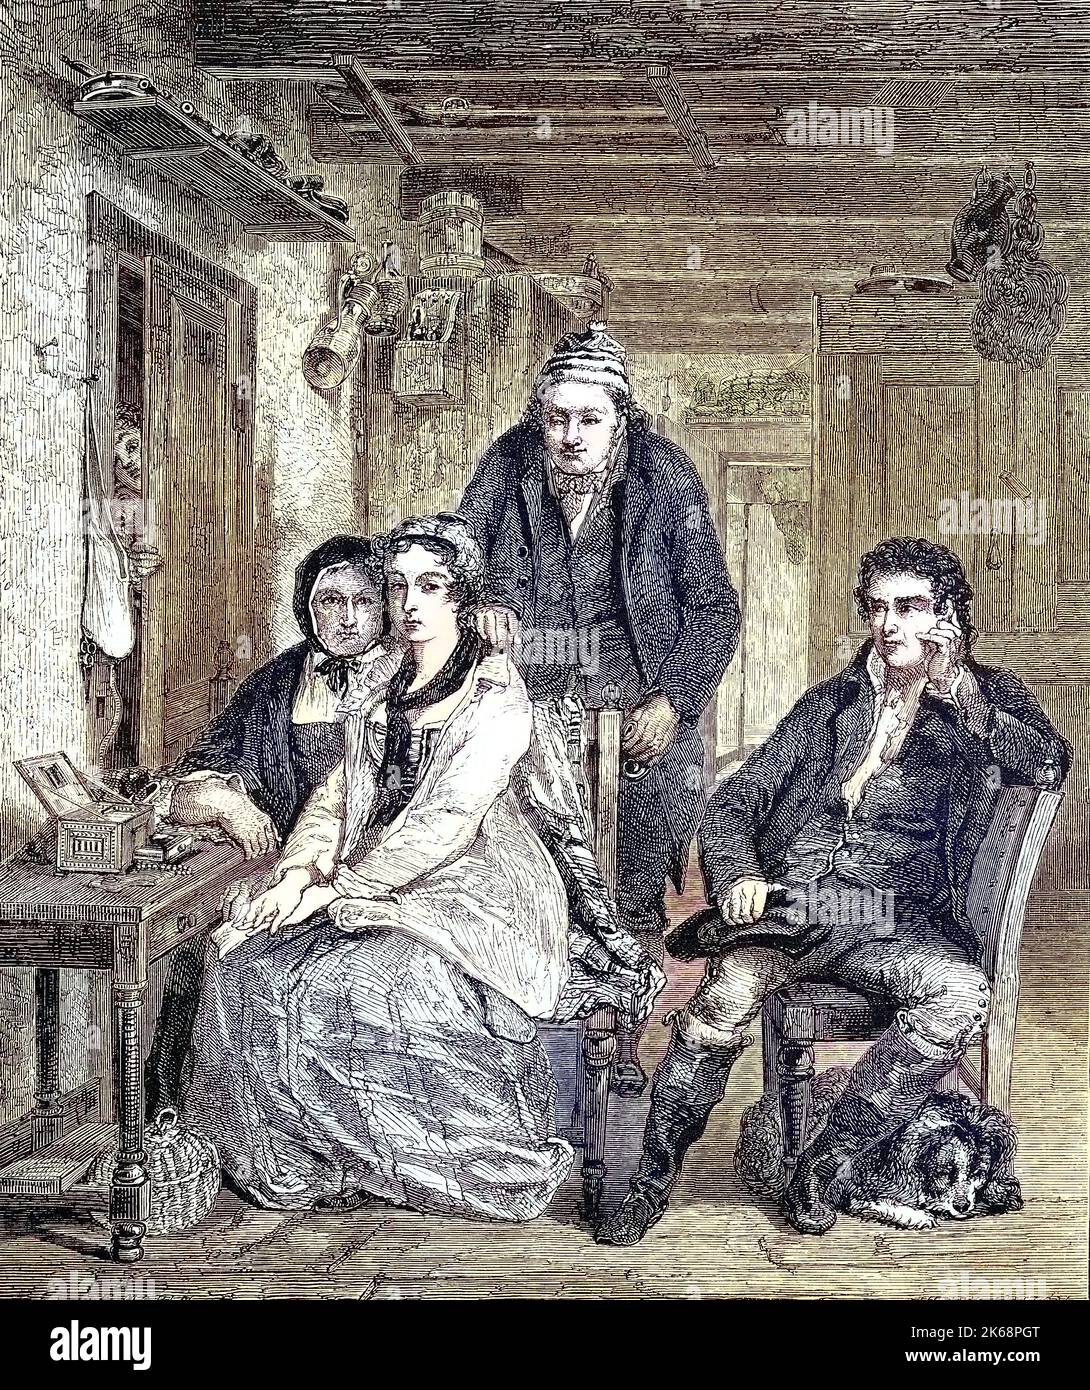 Duncan Gray with his family in the living room, France  /  Duncan Gray mit seiner Familie zu Hause, Frankreich, Historisch, digital improved reproduction of an original from the 19th century / digitale Reproduktion einer Originalvorlage aus dem 19. Jahrhundert, Stock Photo